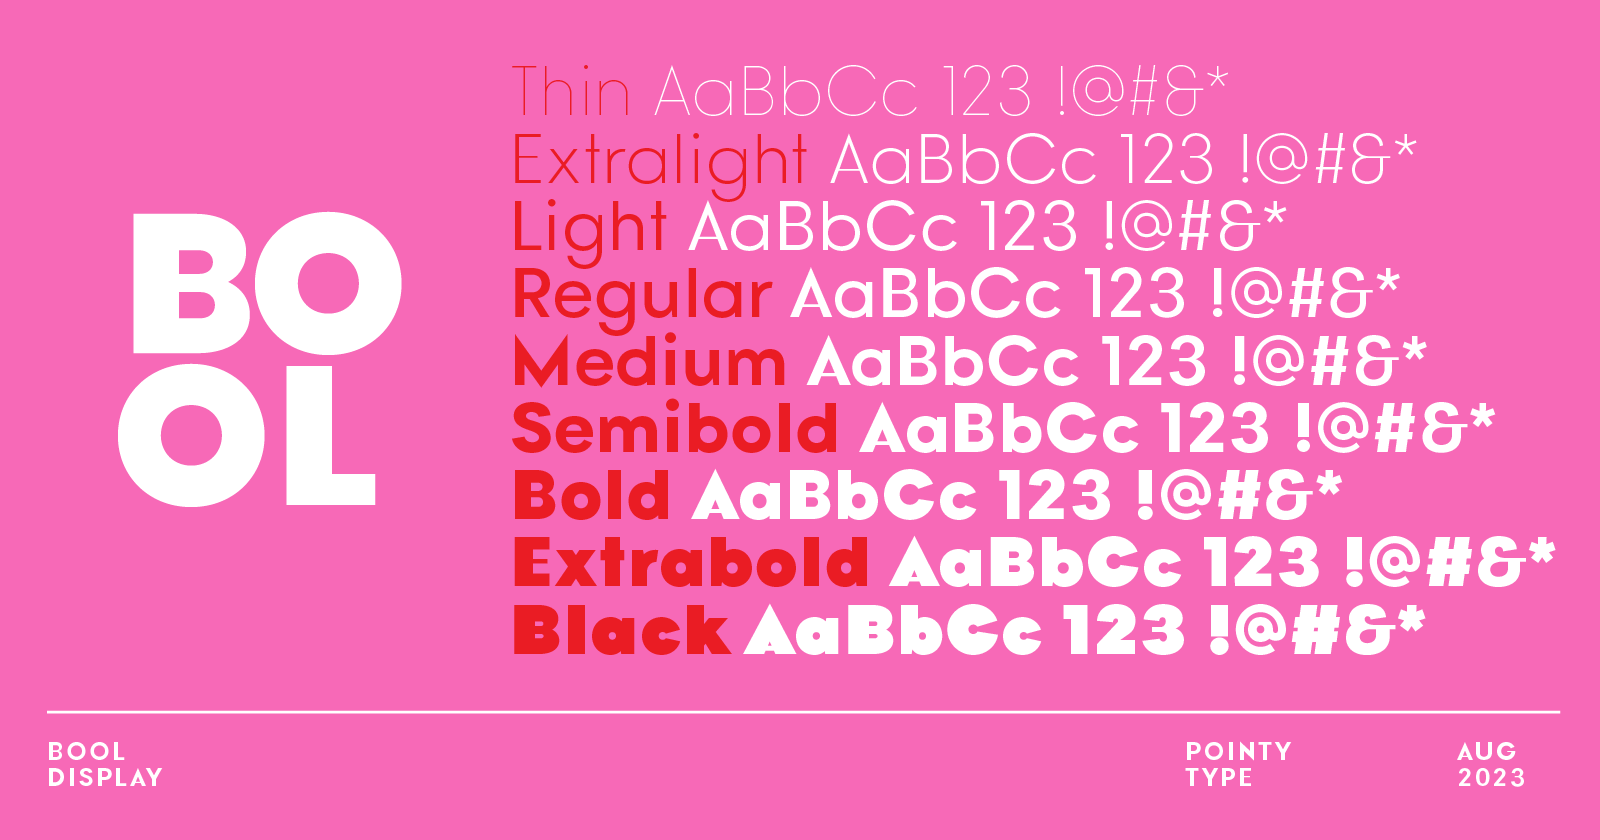 Bool’s nine font weights